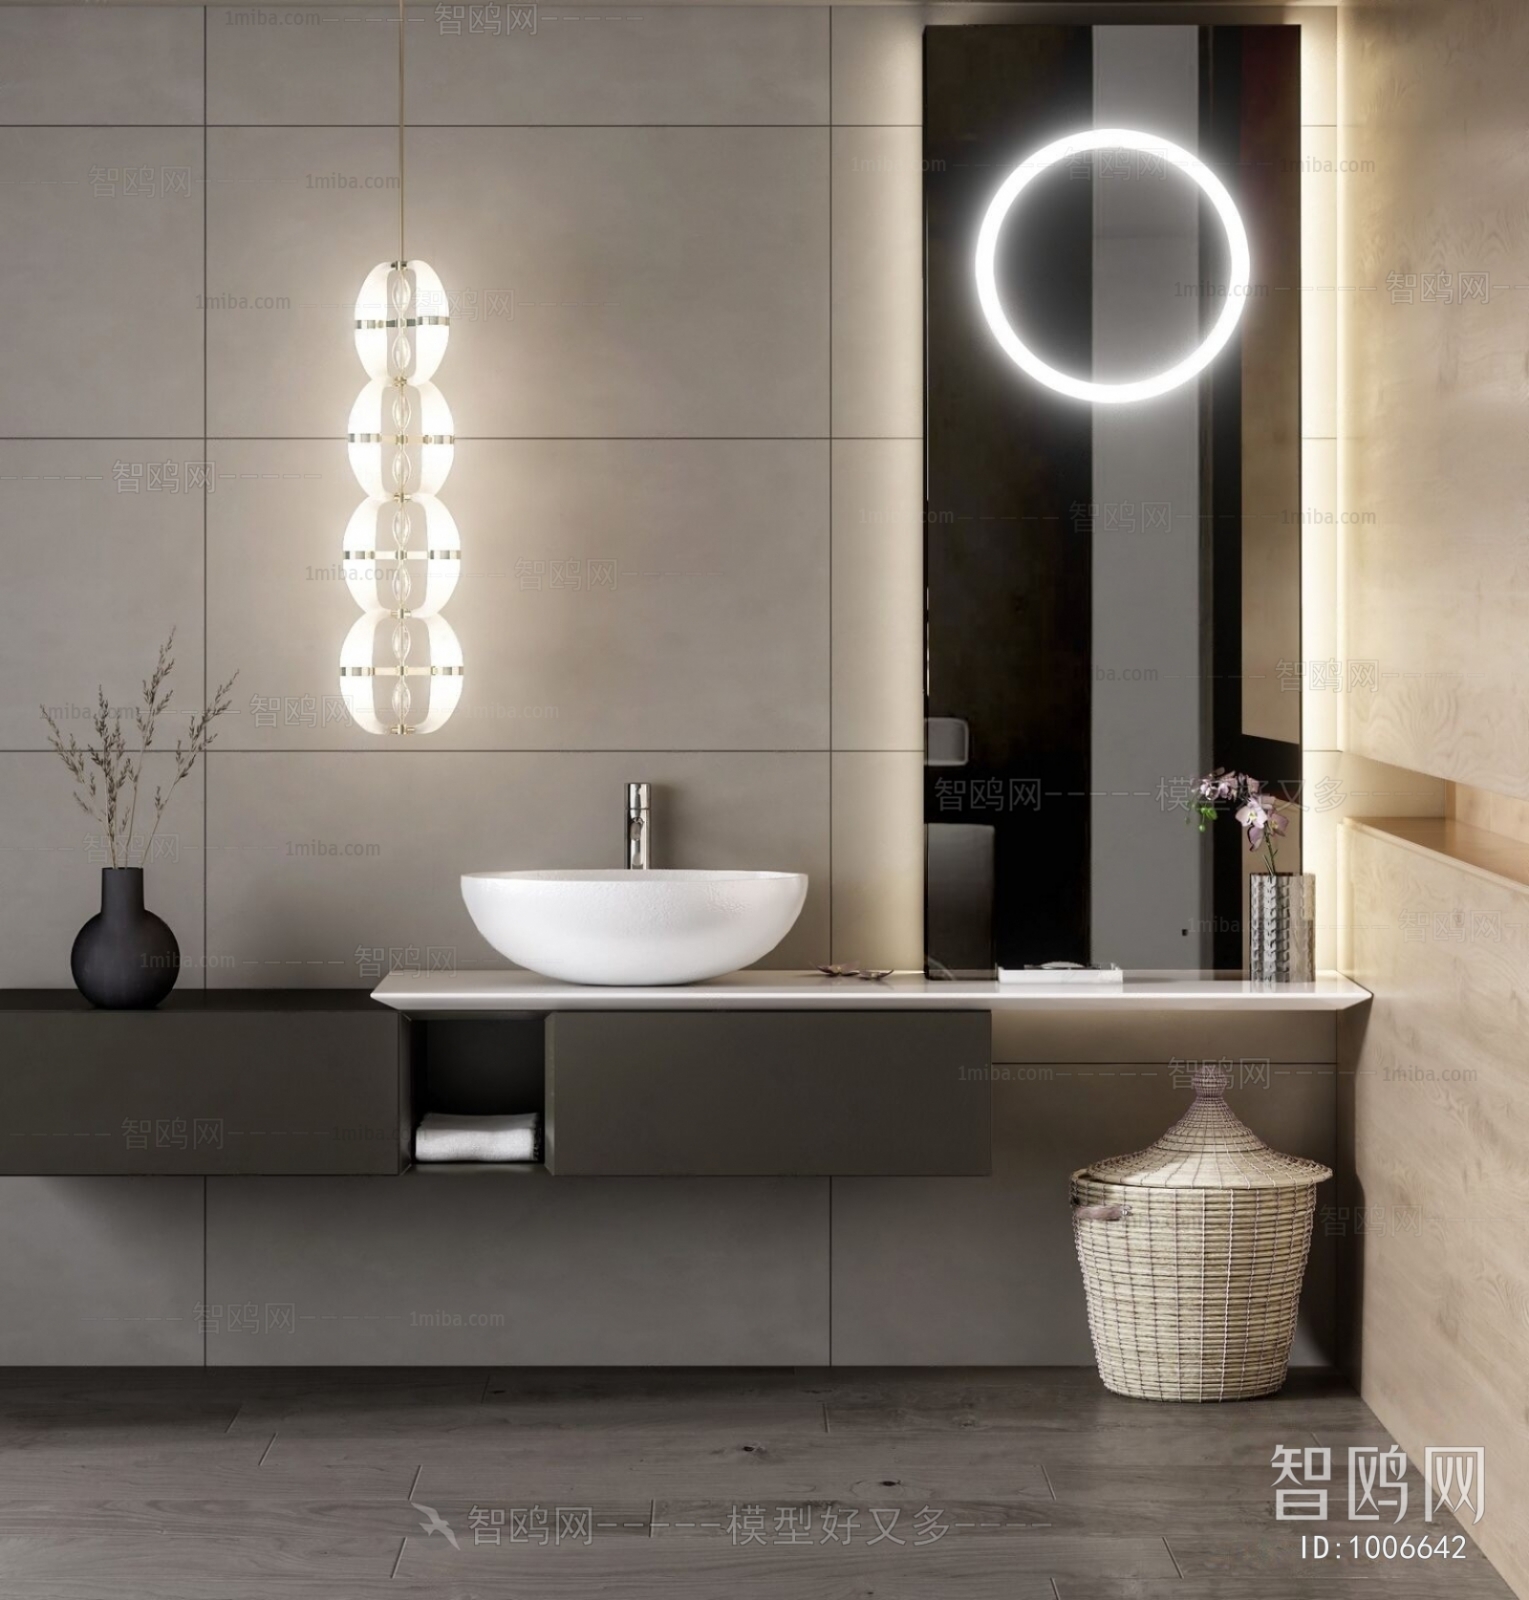 Modern Kitchen And Bathroom Components